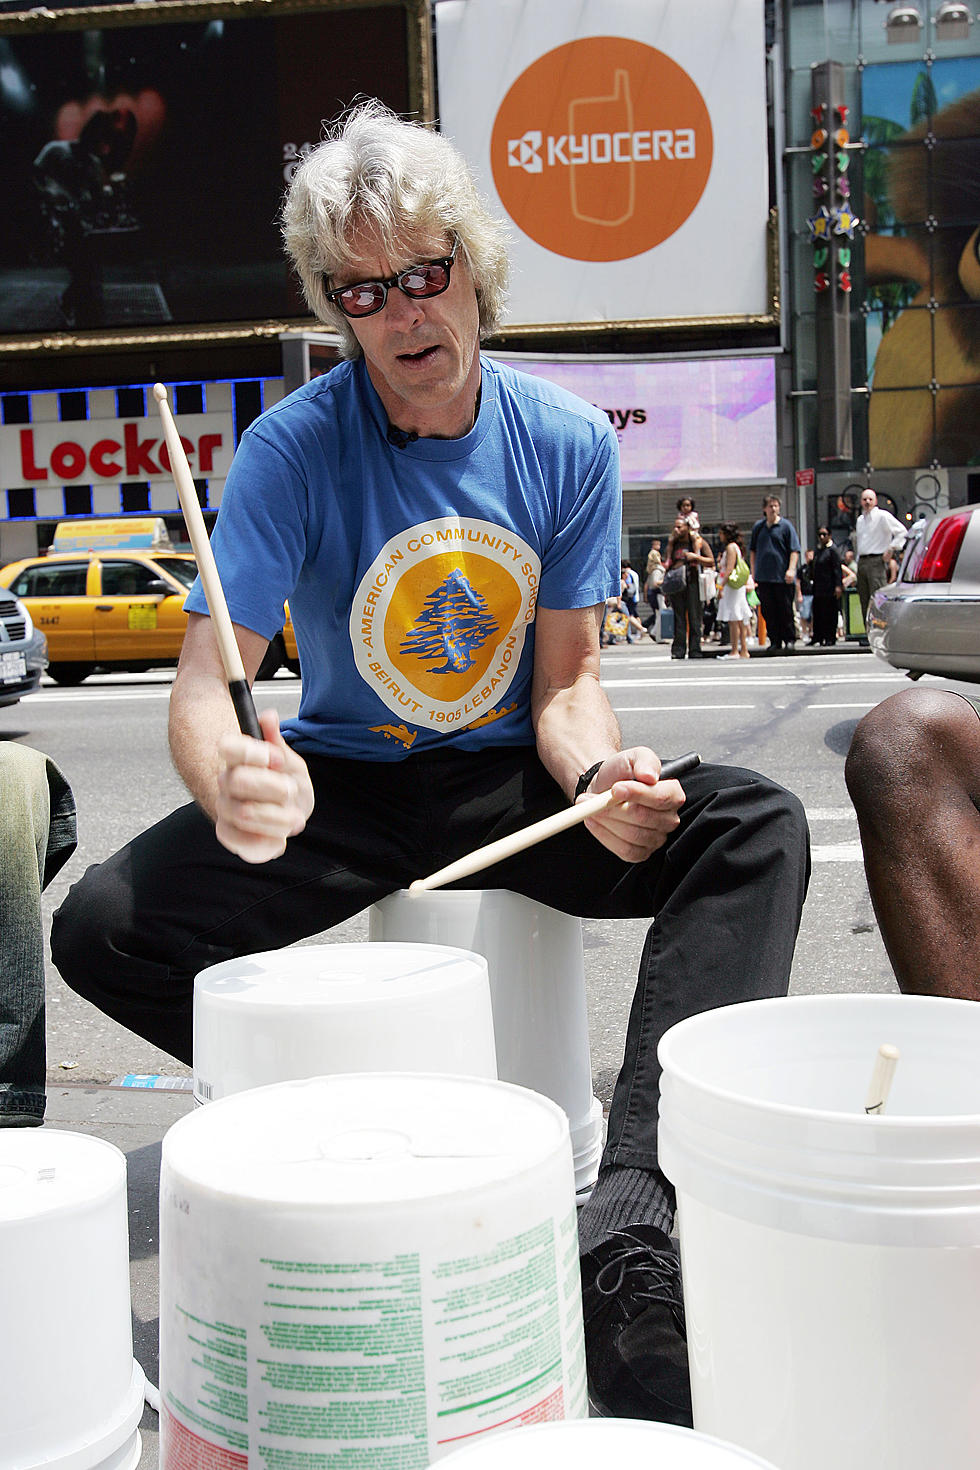 PVC Pipe Drummer Does Insane Cover Of The White Stripes [VIDEO]